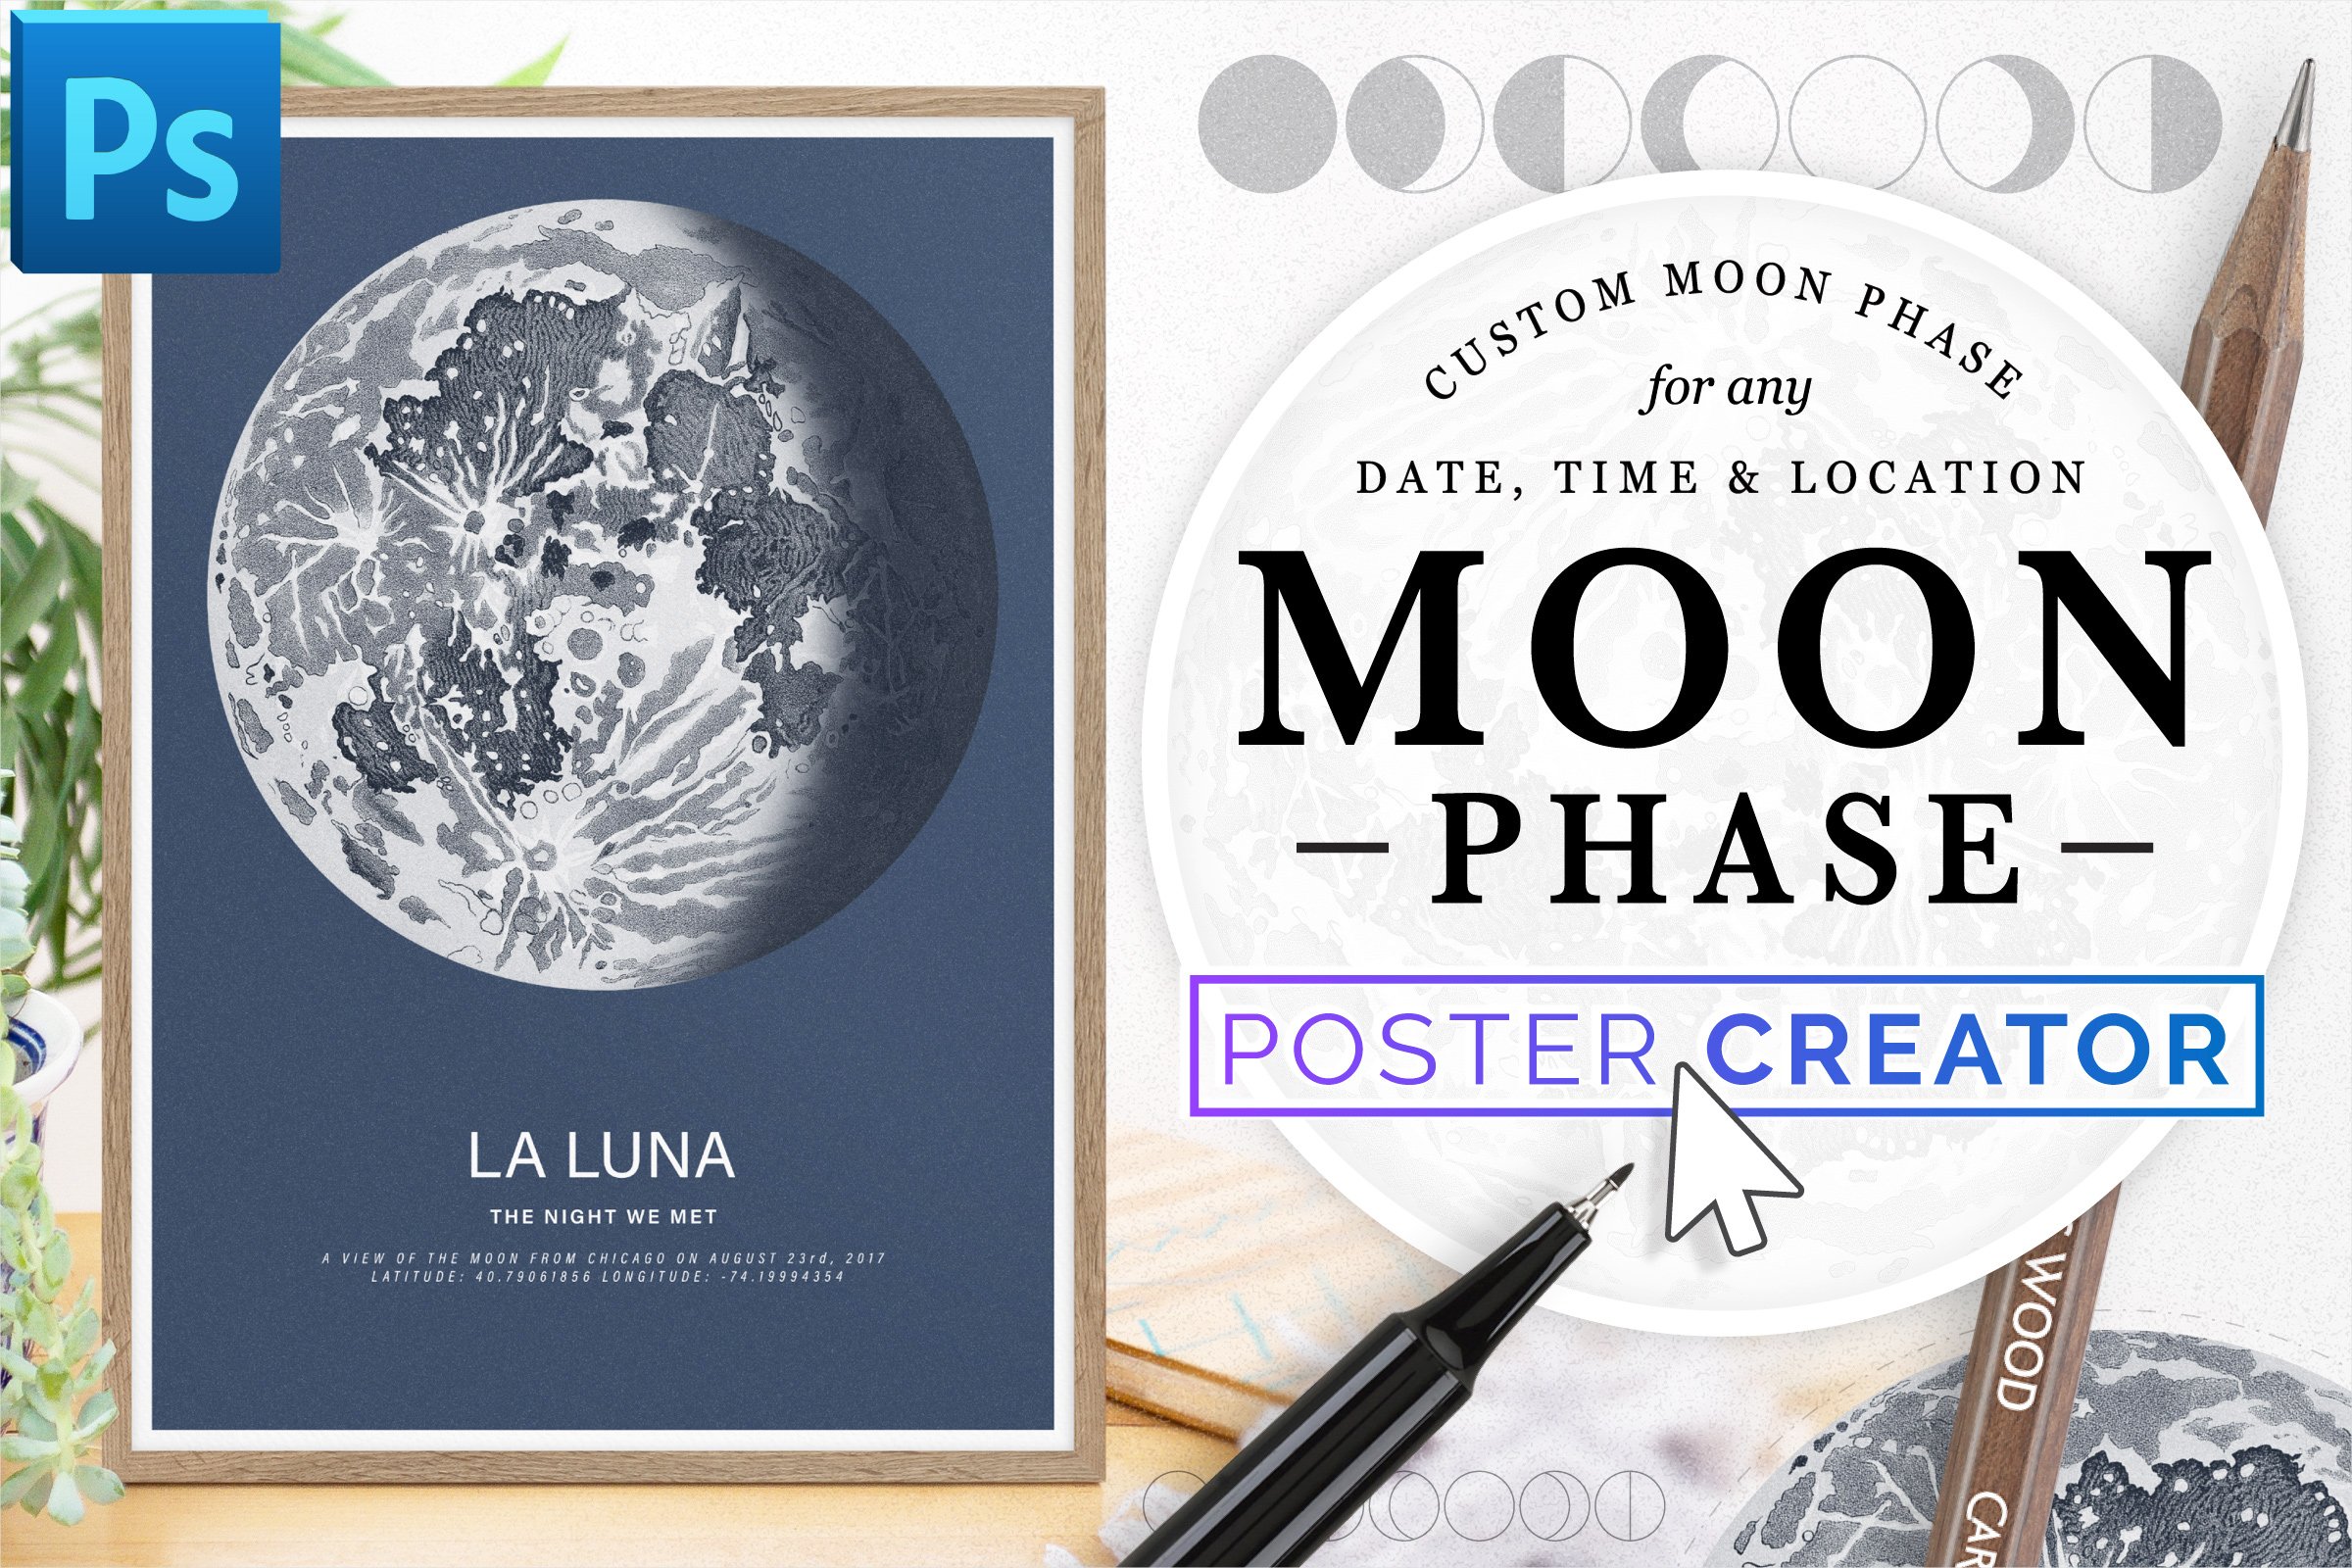 Lunar Phase Poster Creatorcover image.